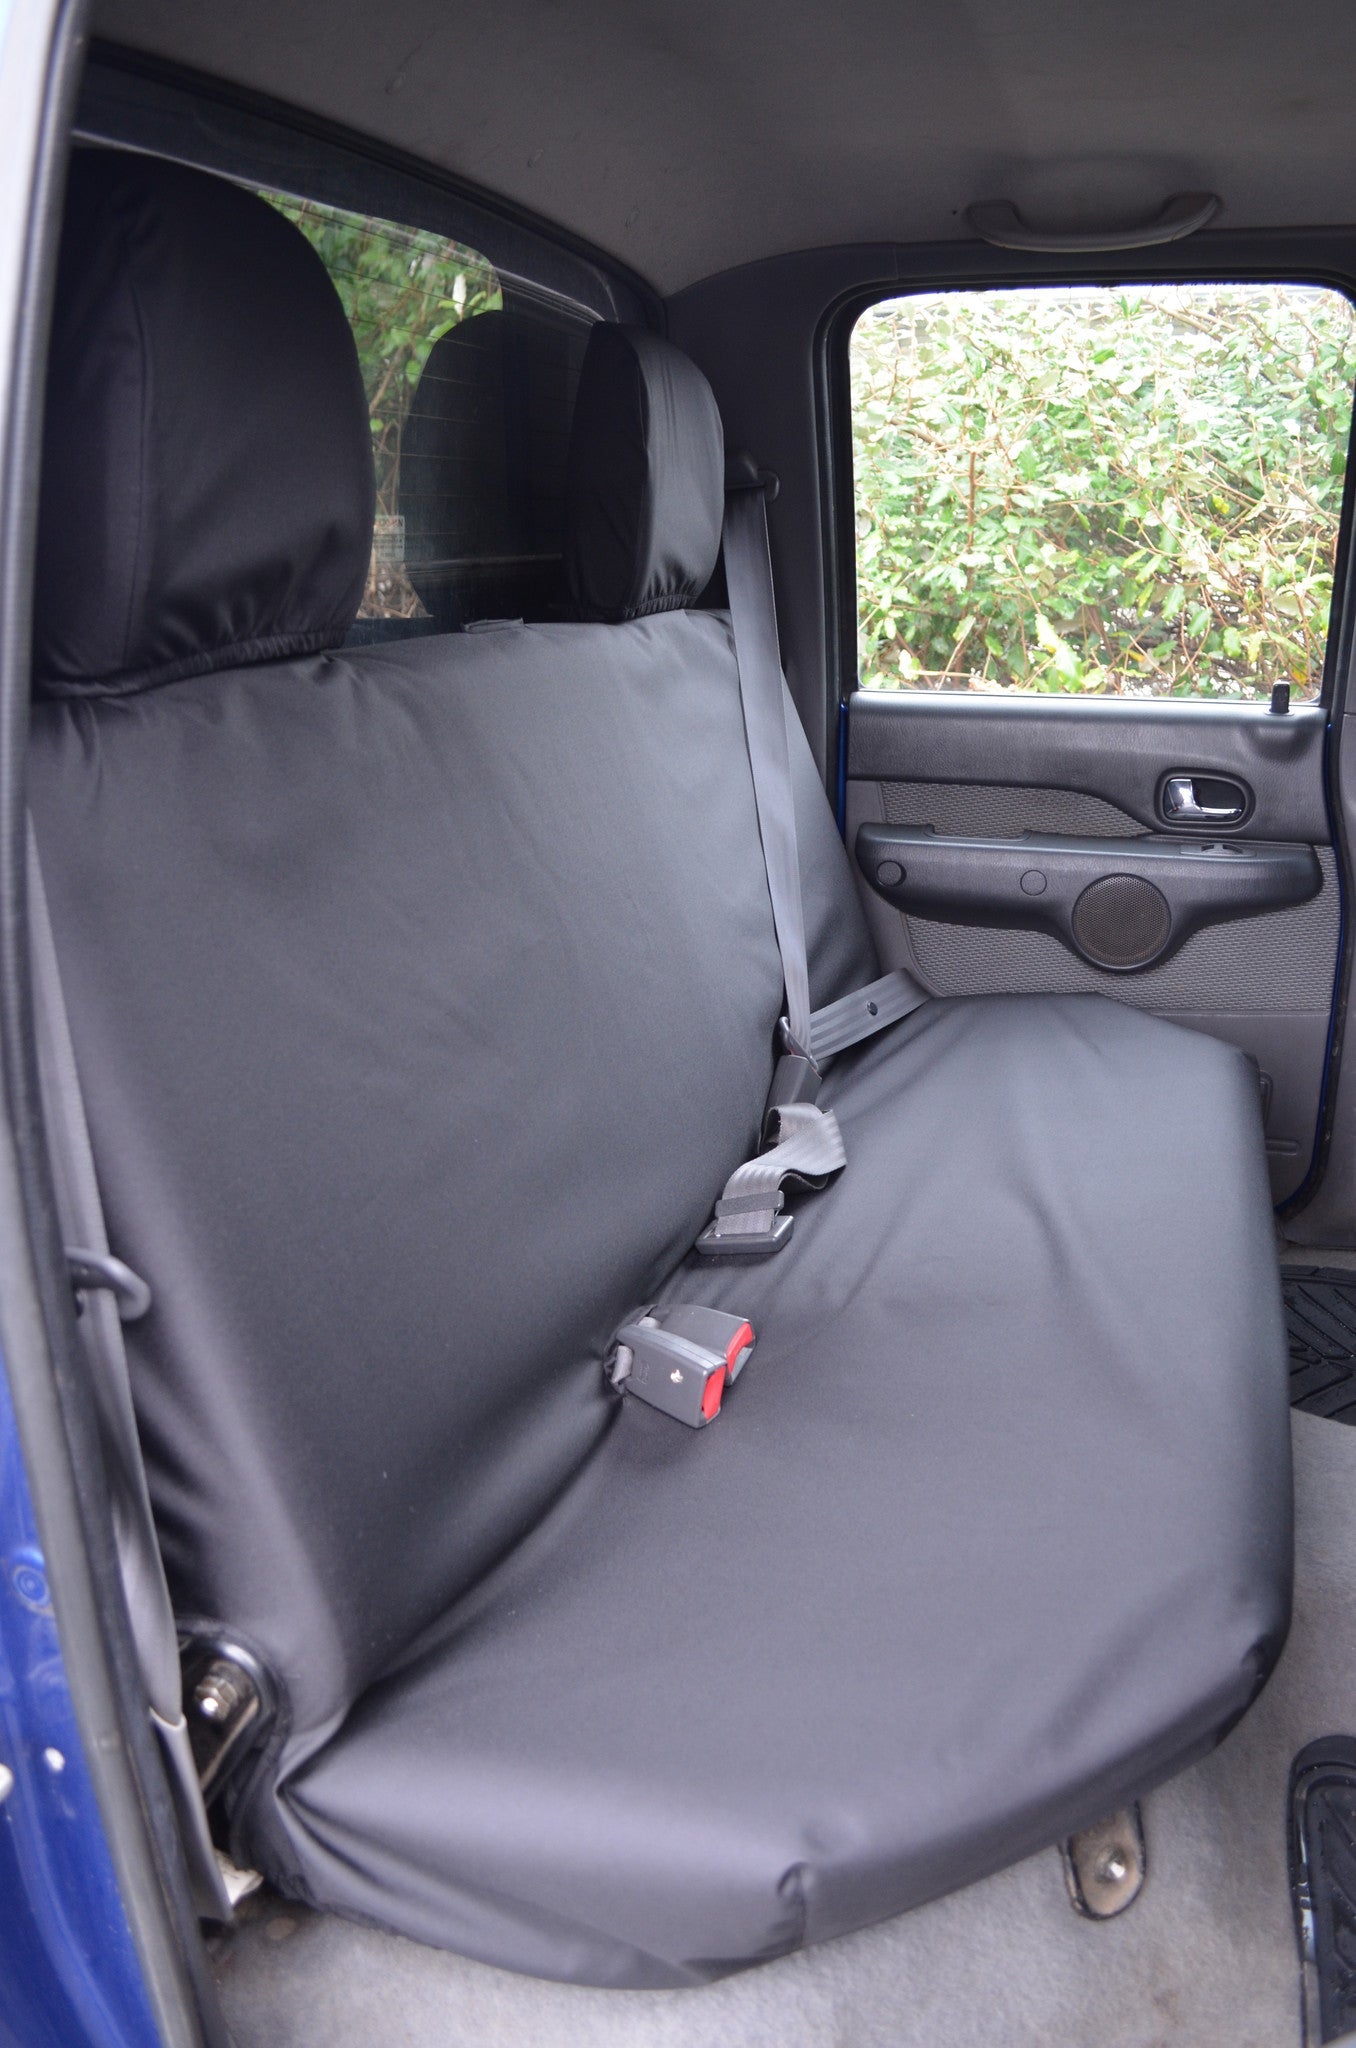 Ford Ranger 1999 to 2006 Seat Covers Rear Seat Cover / Black Scutes Ltd